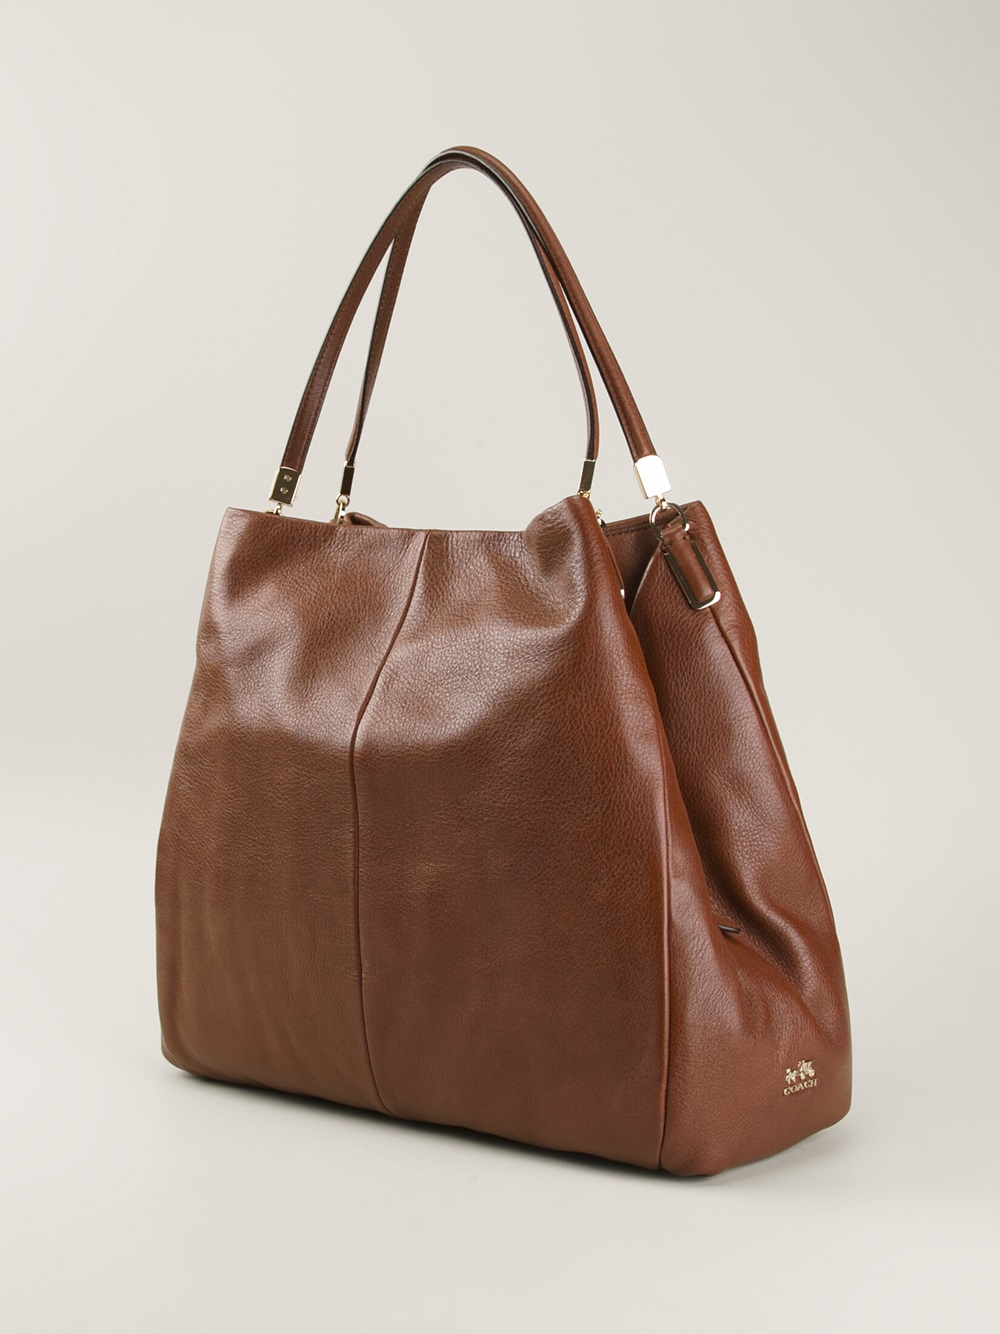 Lyst - Coach Multiple Compartment Tote in Brown